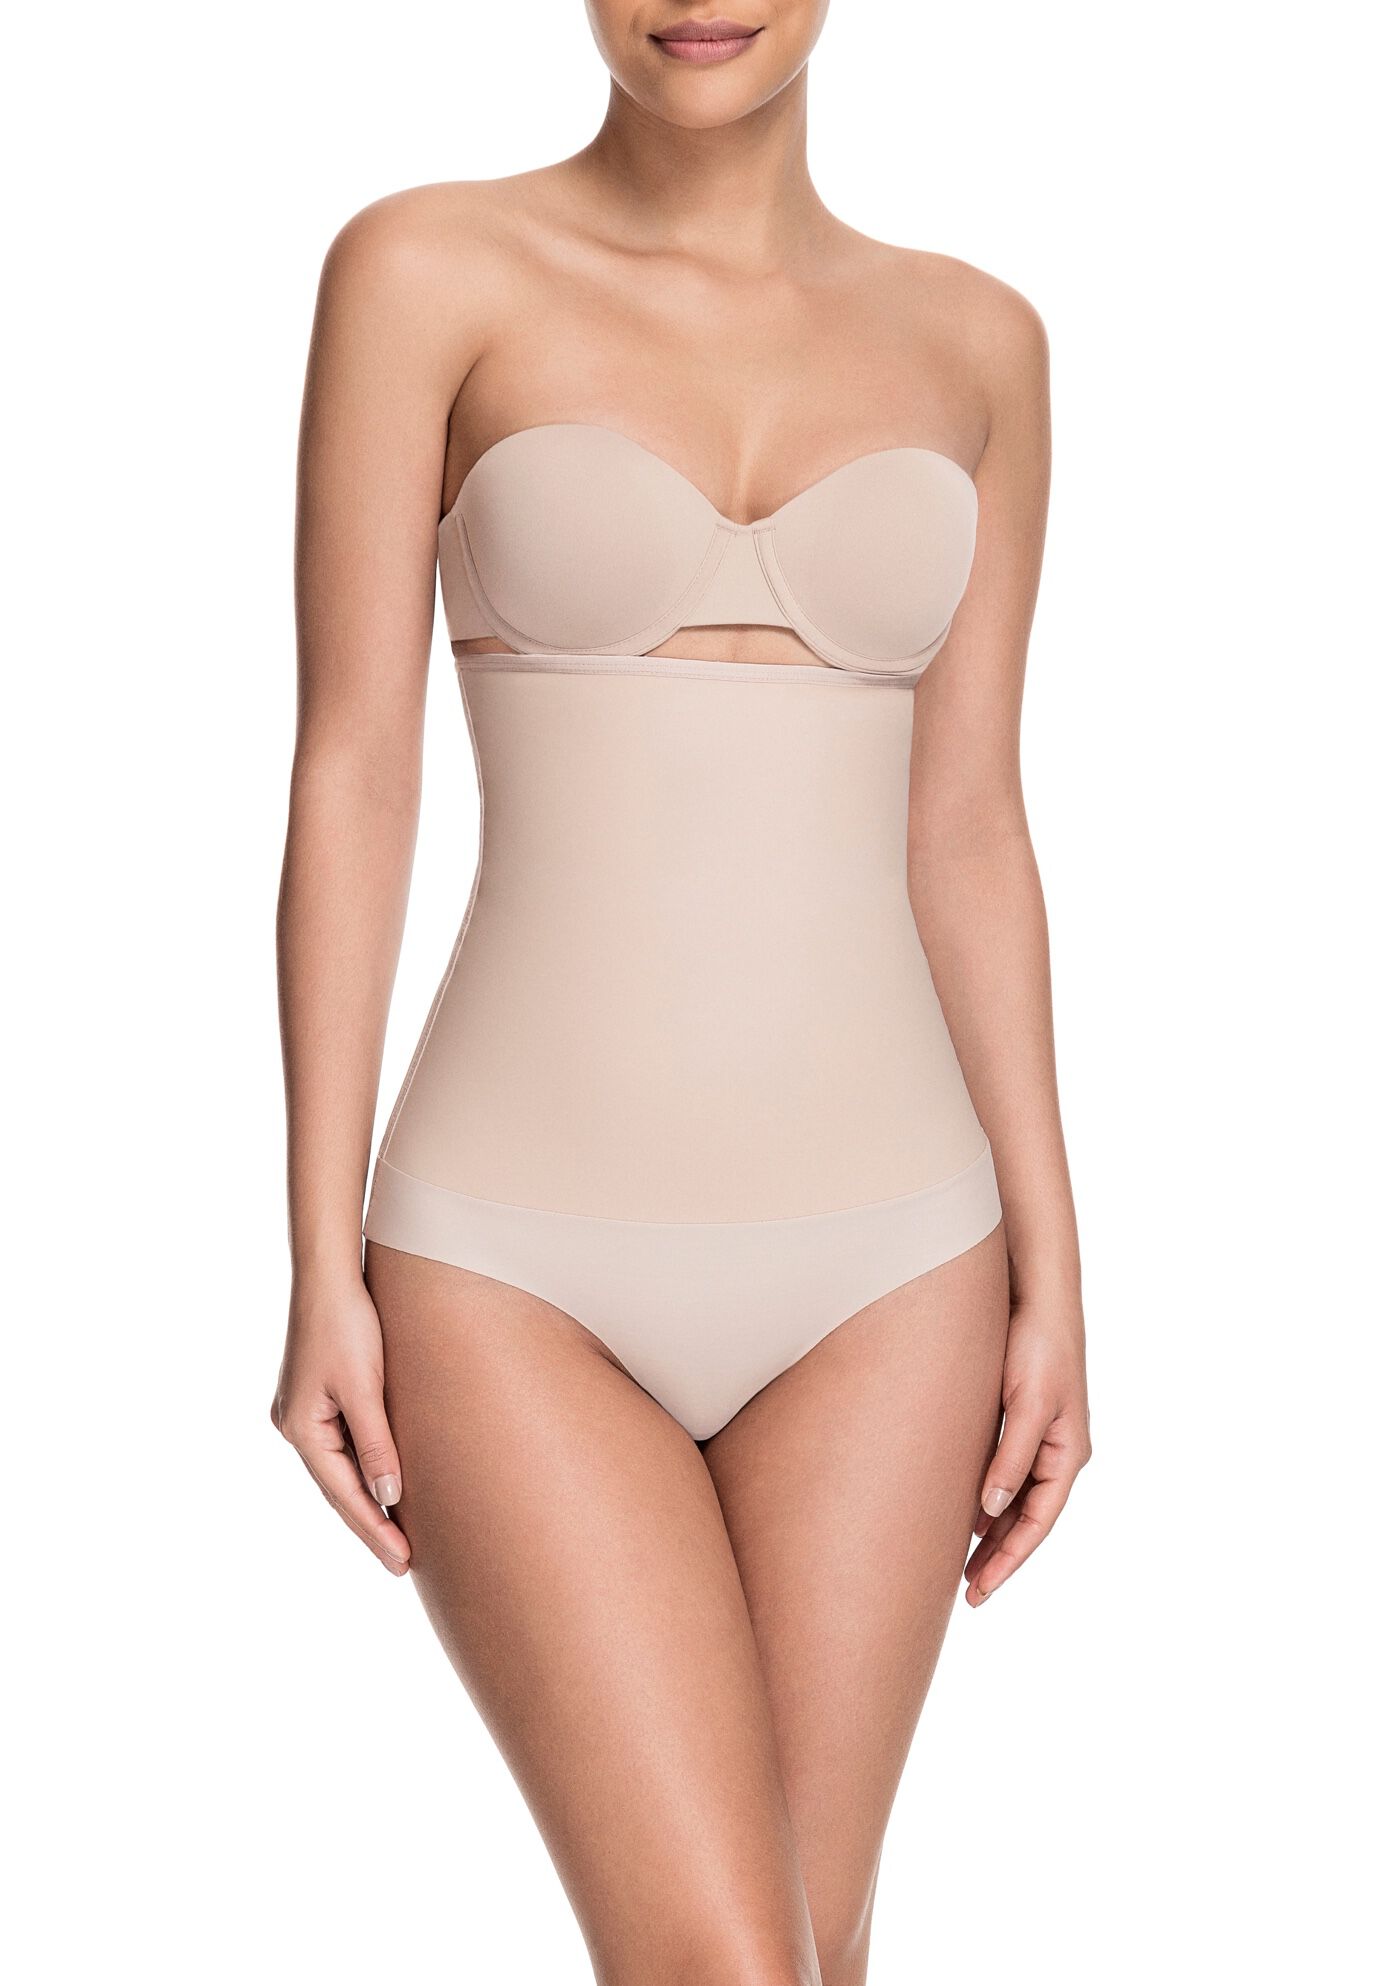 Plus Size Women's Celebrity Style High Waist Thong by Squeem in Beige (Size XL)